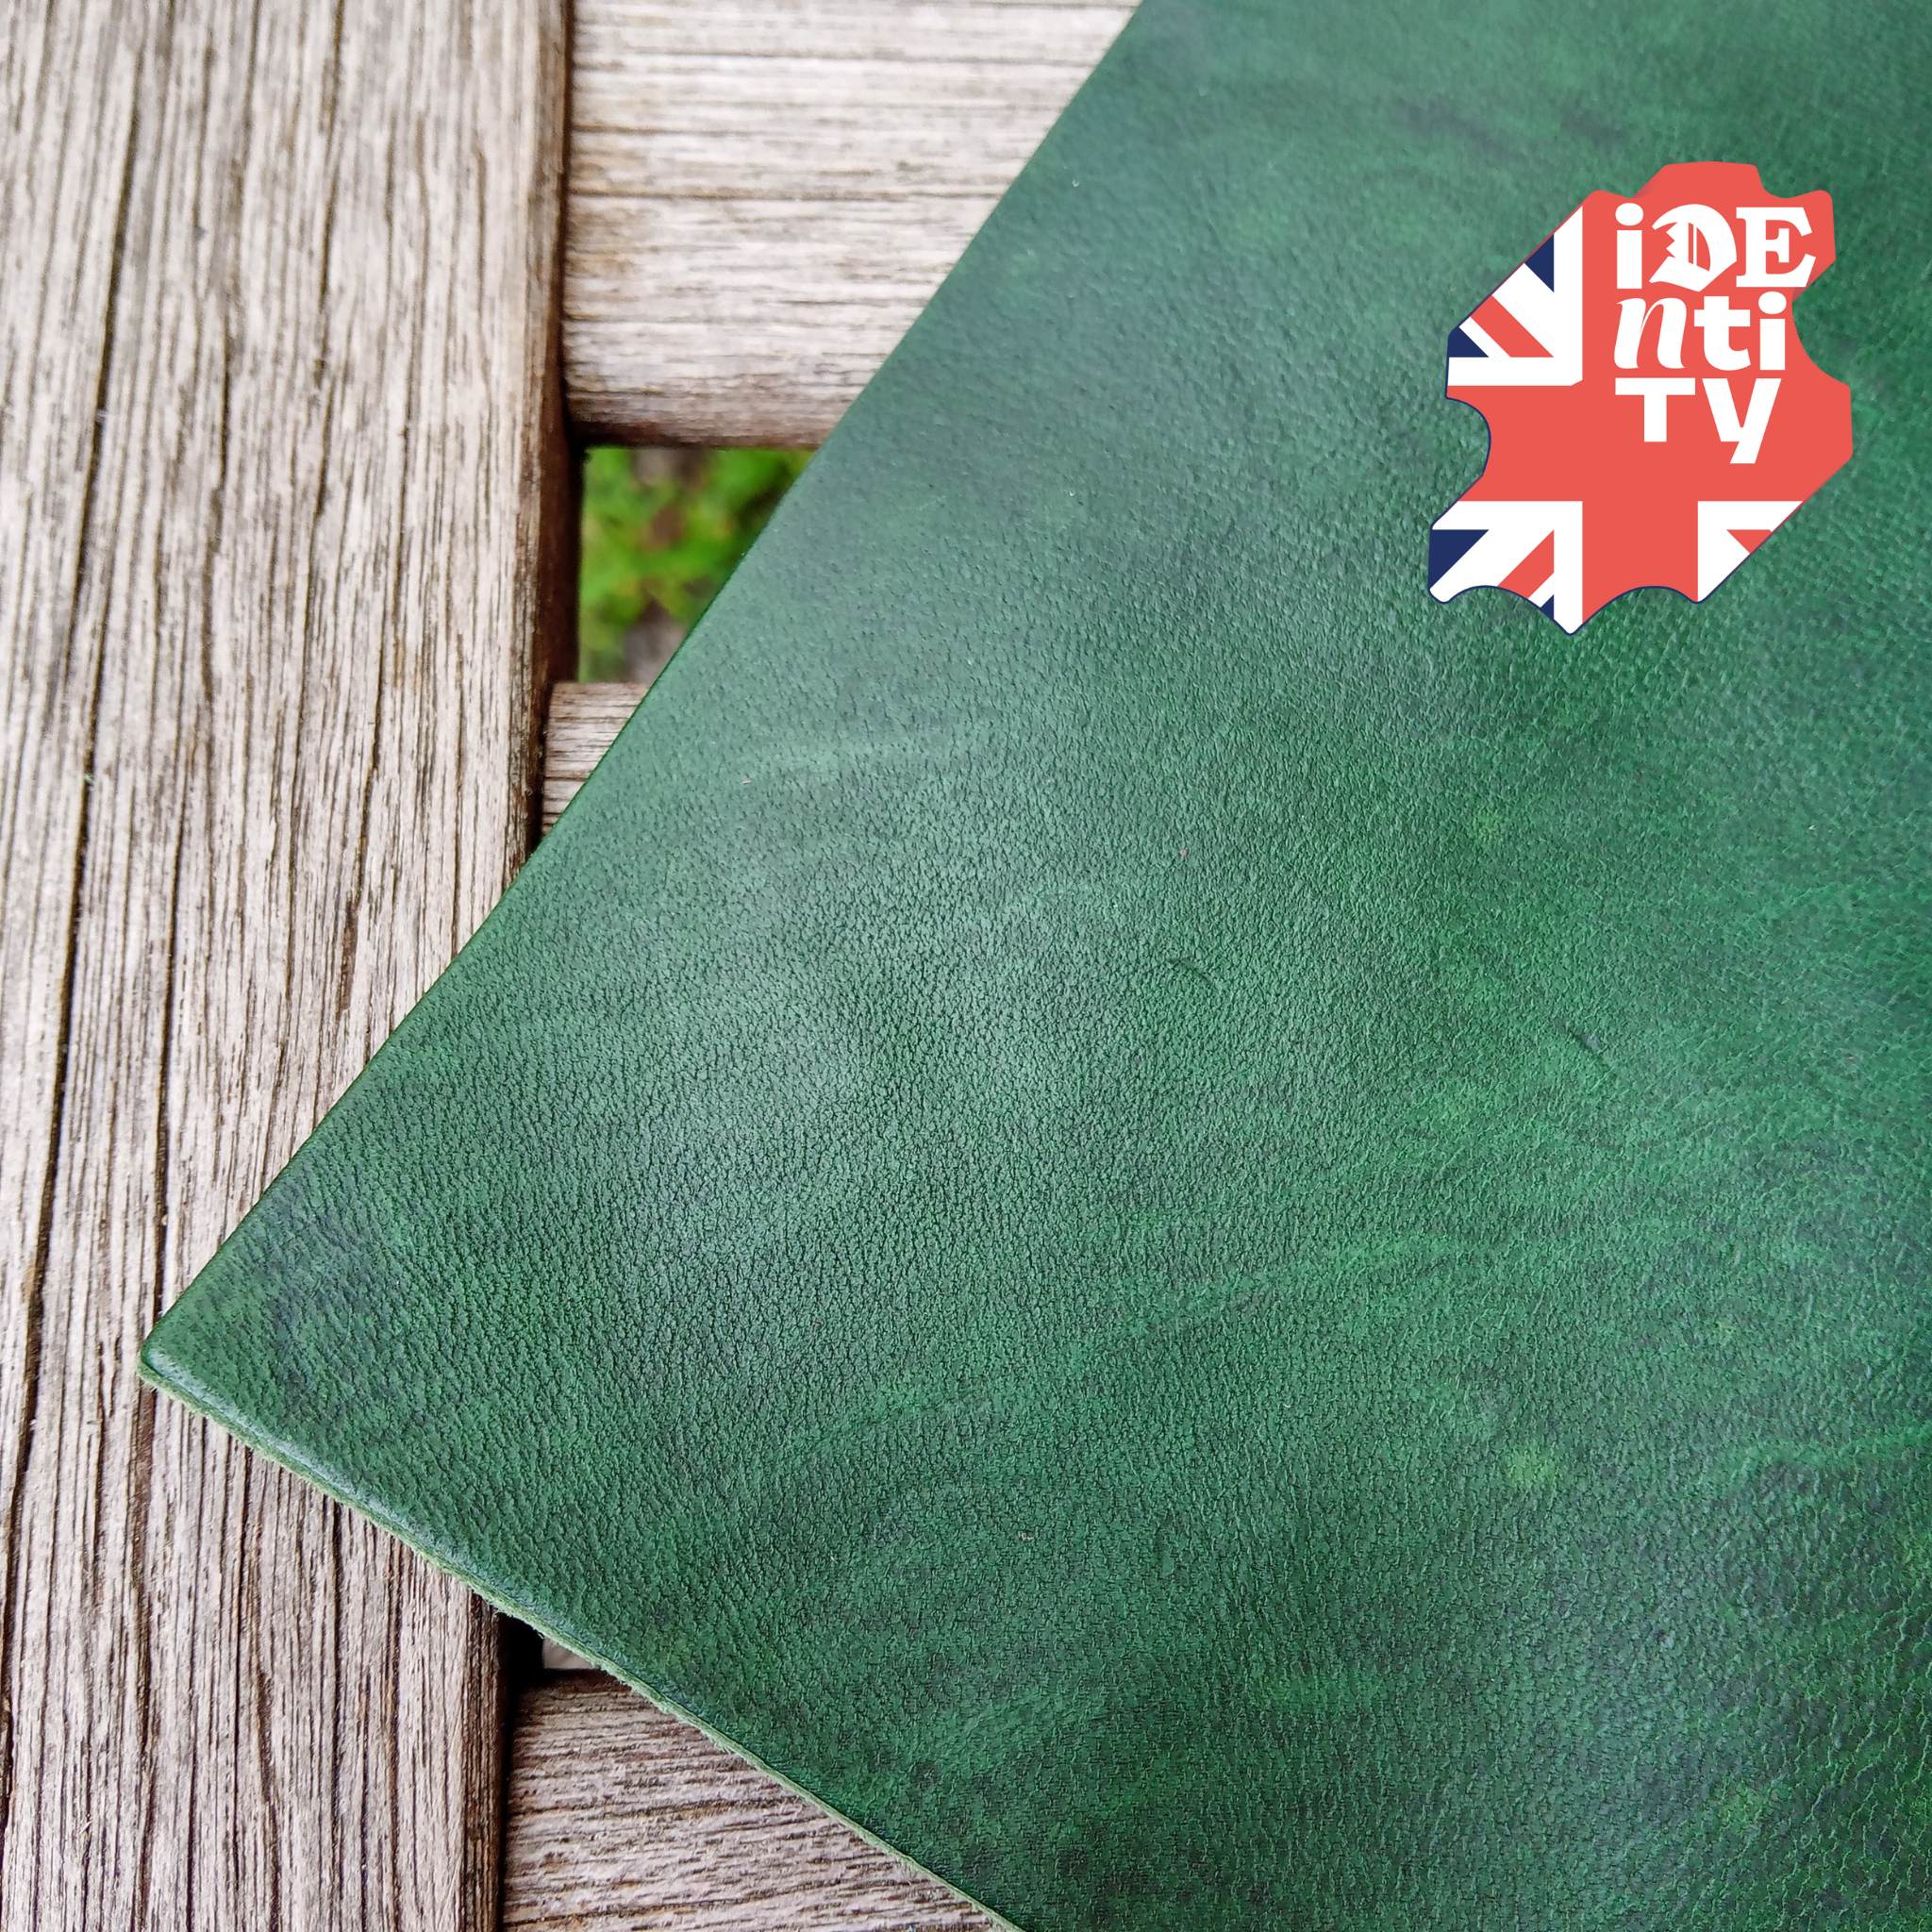 Green Heritage A3 vegetable tanned leather cuts taken from the Heritage collection of leather sourced from the old Clayton's tannery in Chesterfield.